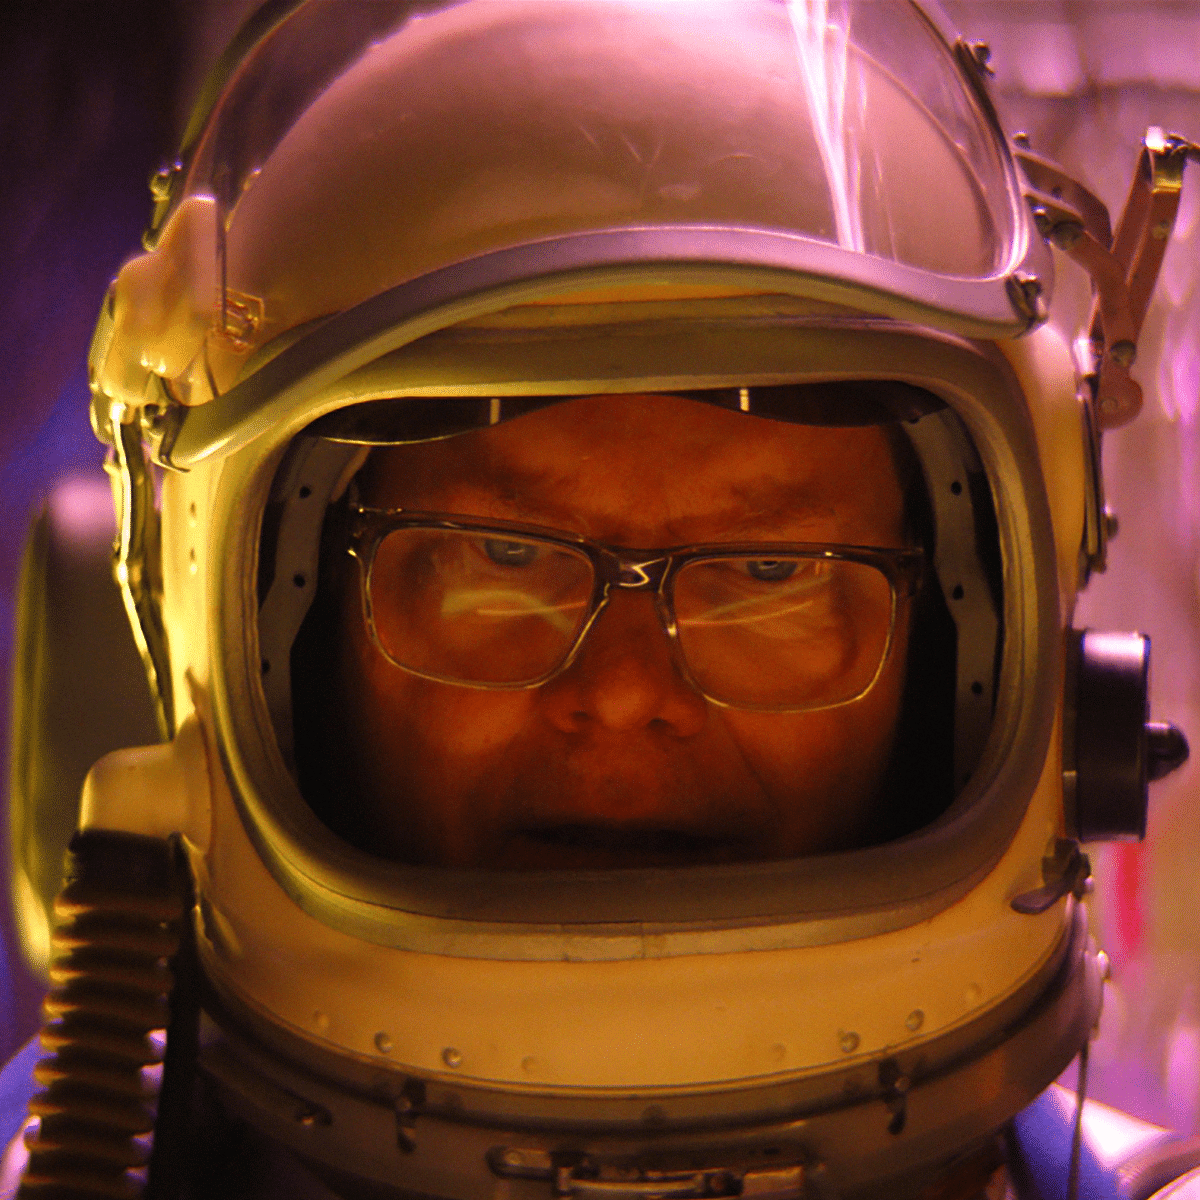 person in a space helmet and glasses looks concerned